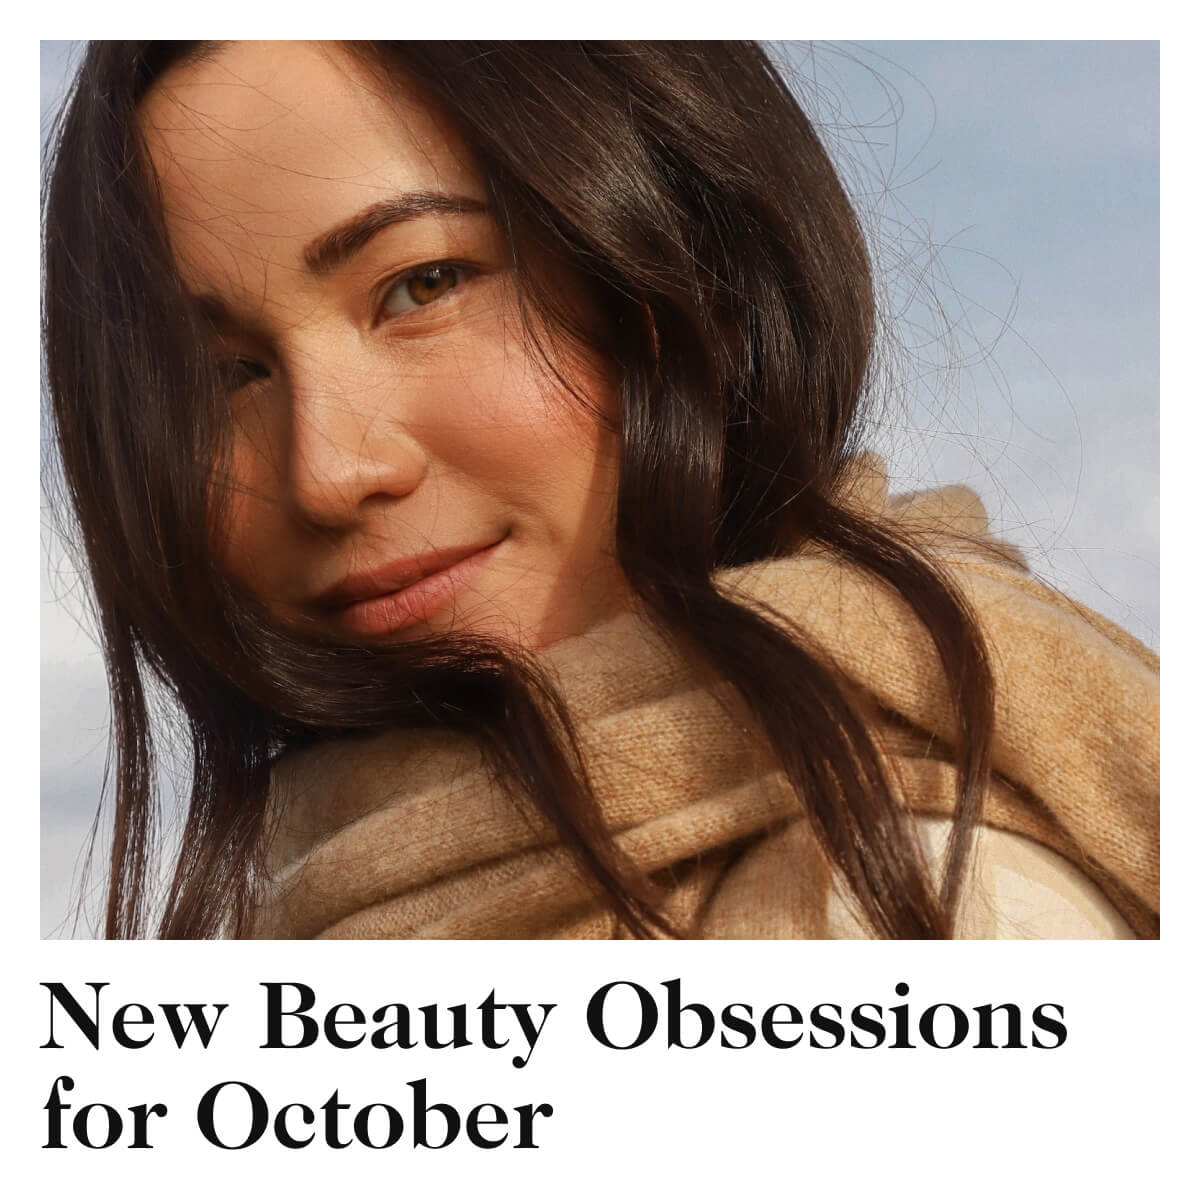 New Beauty Obsessions for October